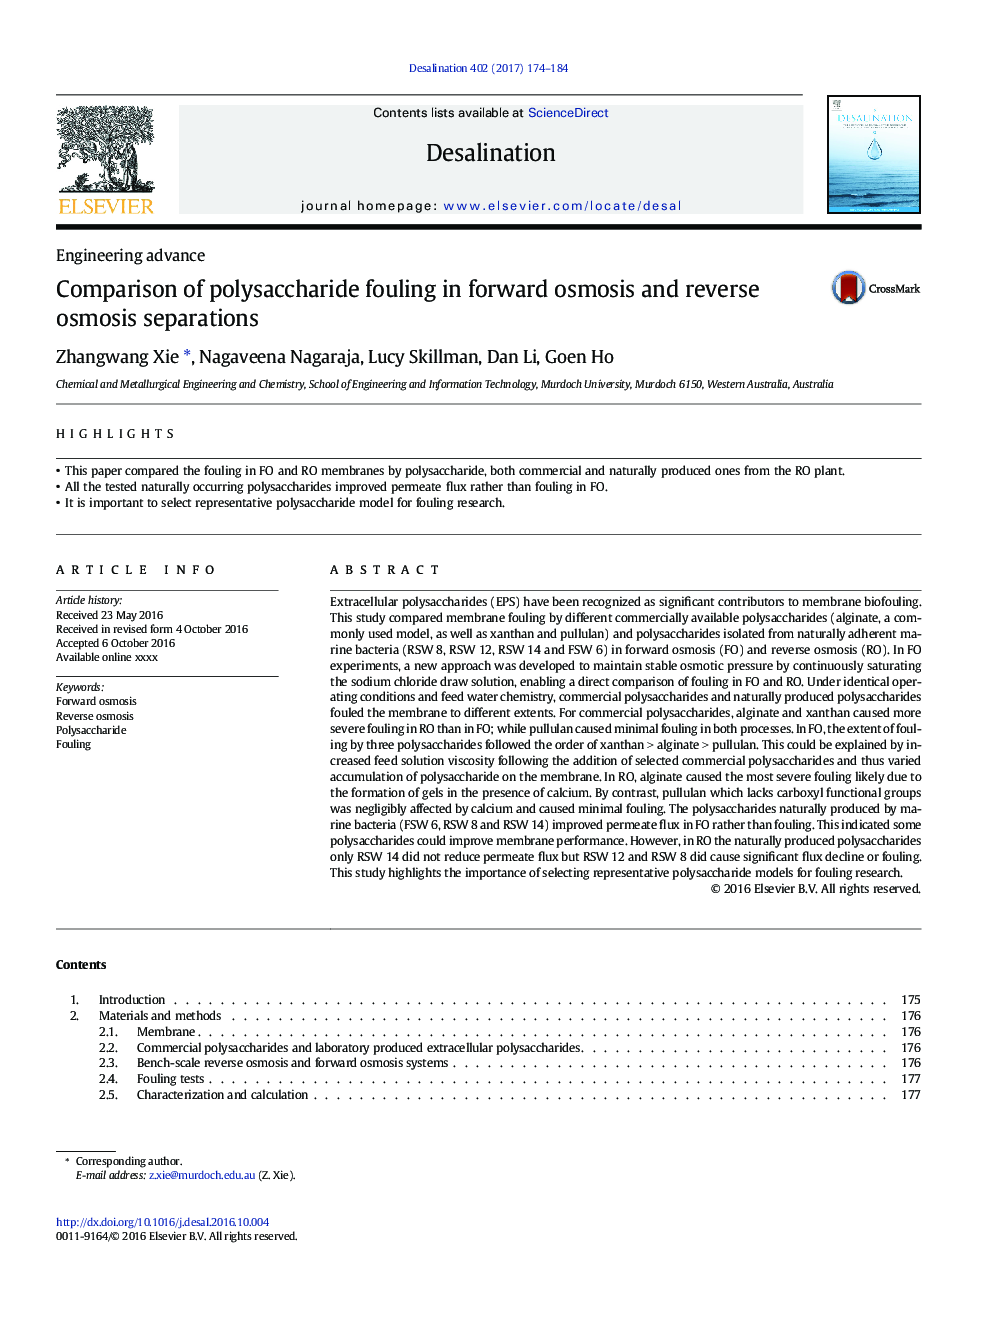 Comparison of polysaccharide fouling in forward osmosis and reverse osmosis separations